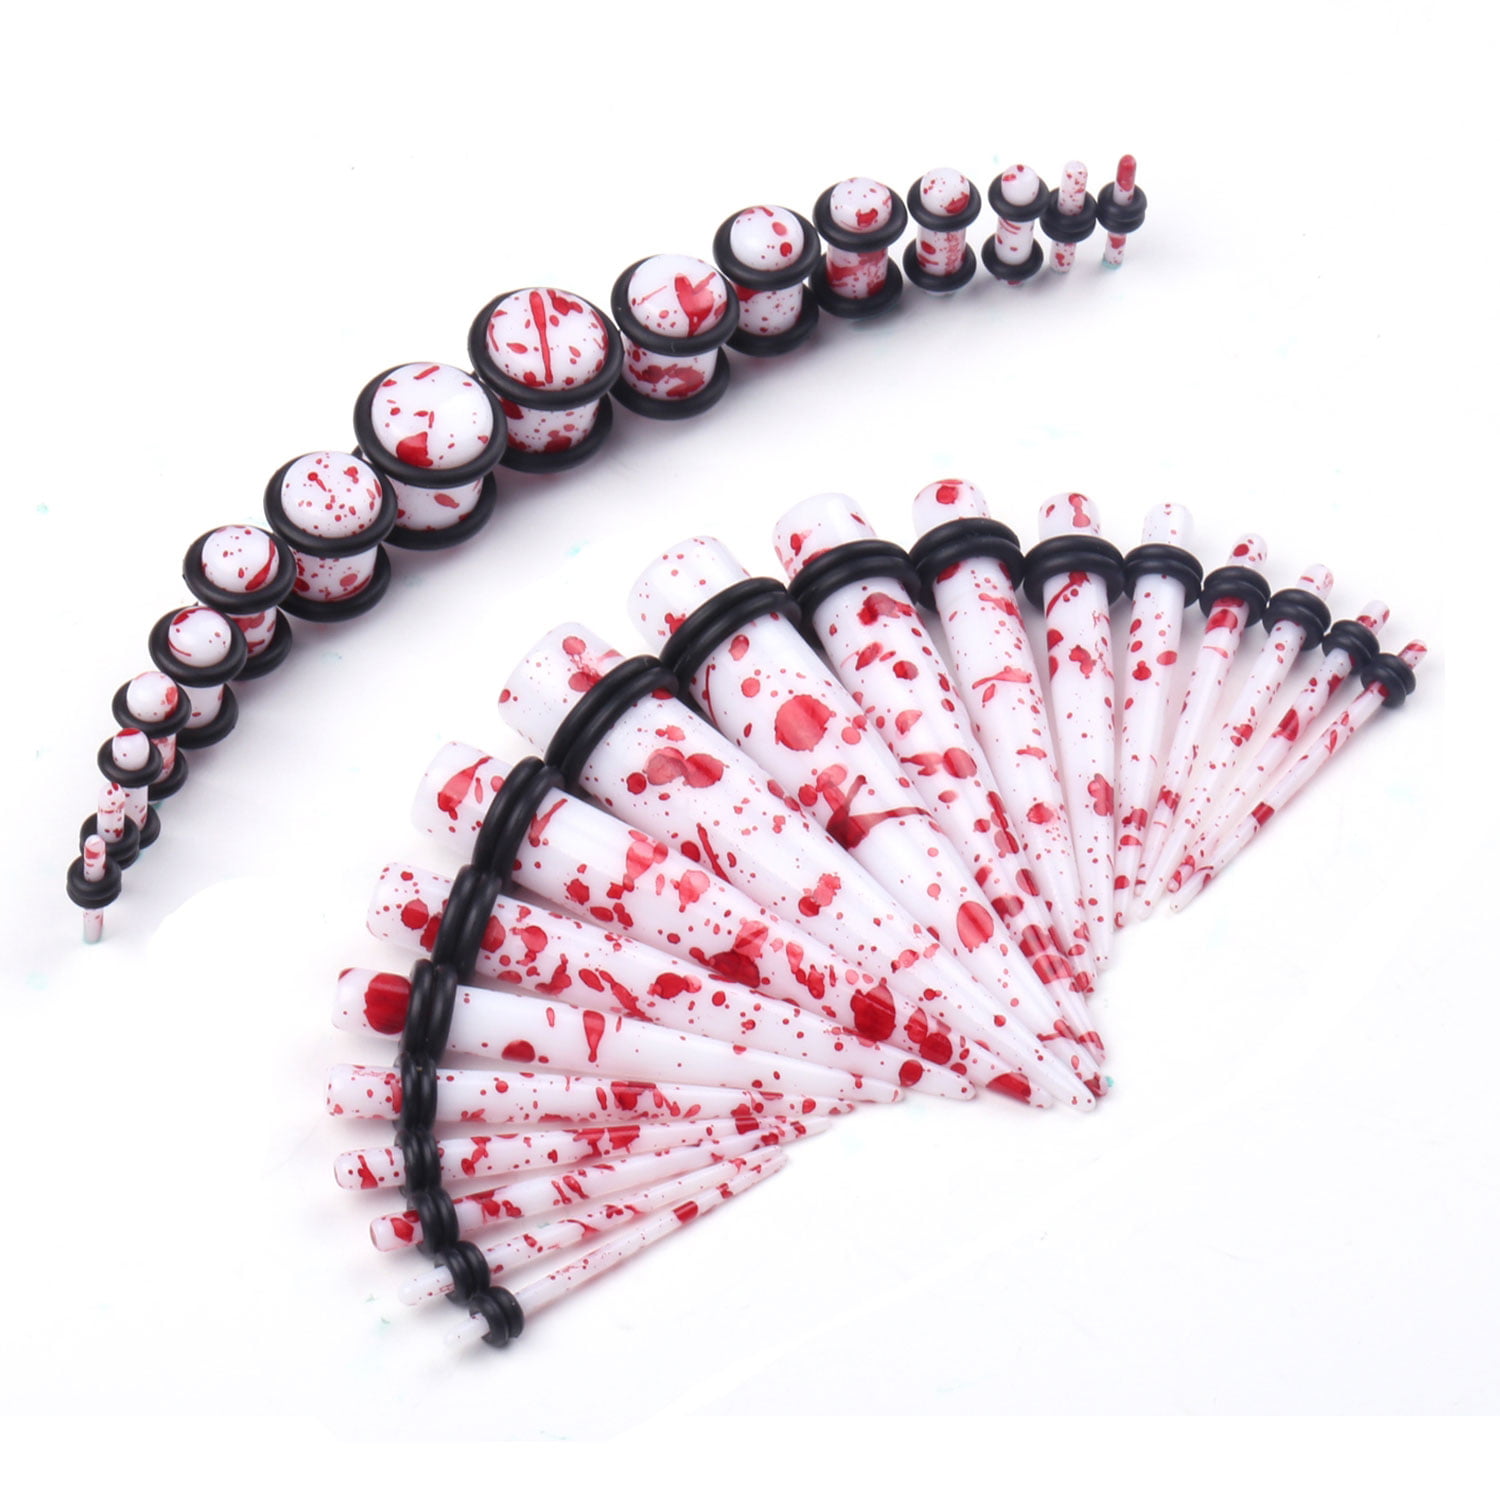 V057 Red Marble Ear Stretchers Tapers Expanders 14 12 10 8 6 4 2 0 00G Gauge Kit 